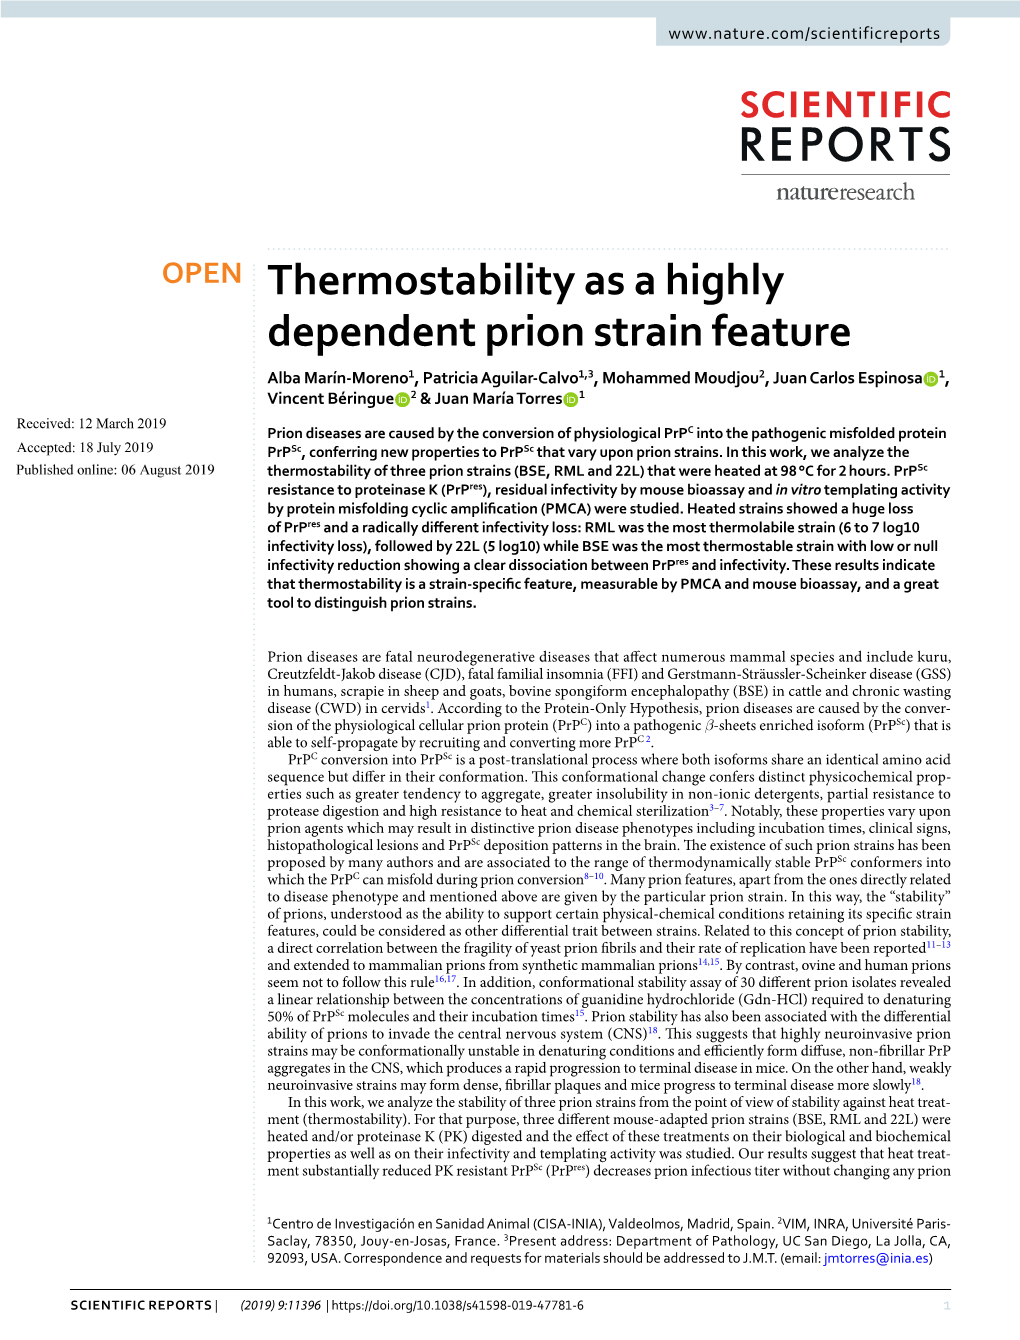 Thermostability As a Highly Dependent Prion Strain Feature